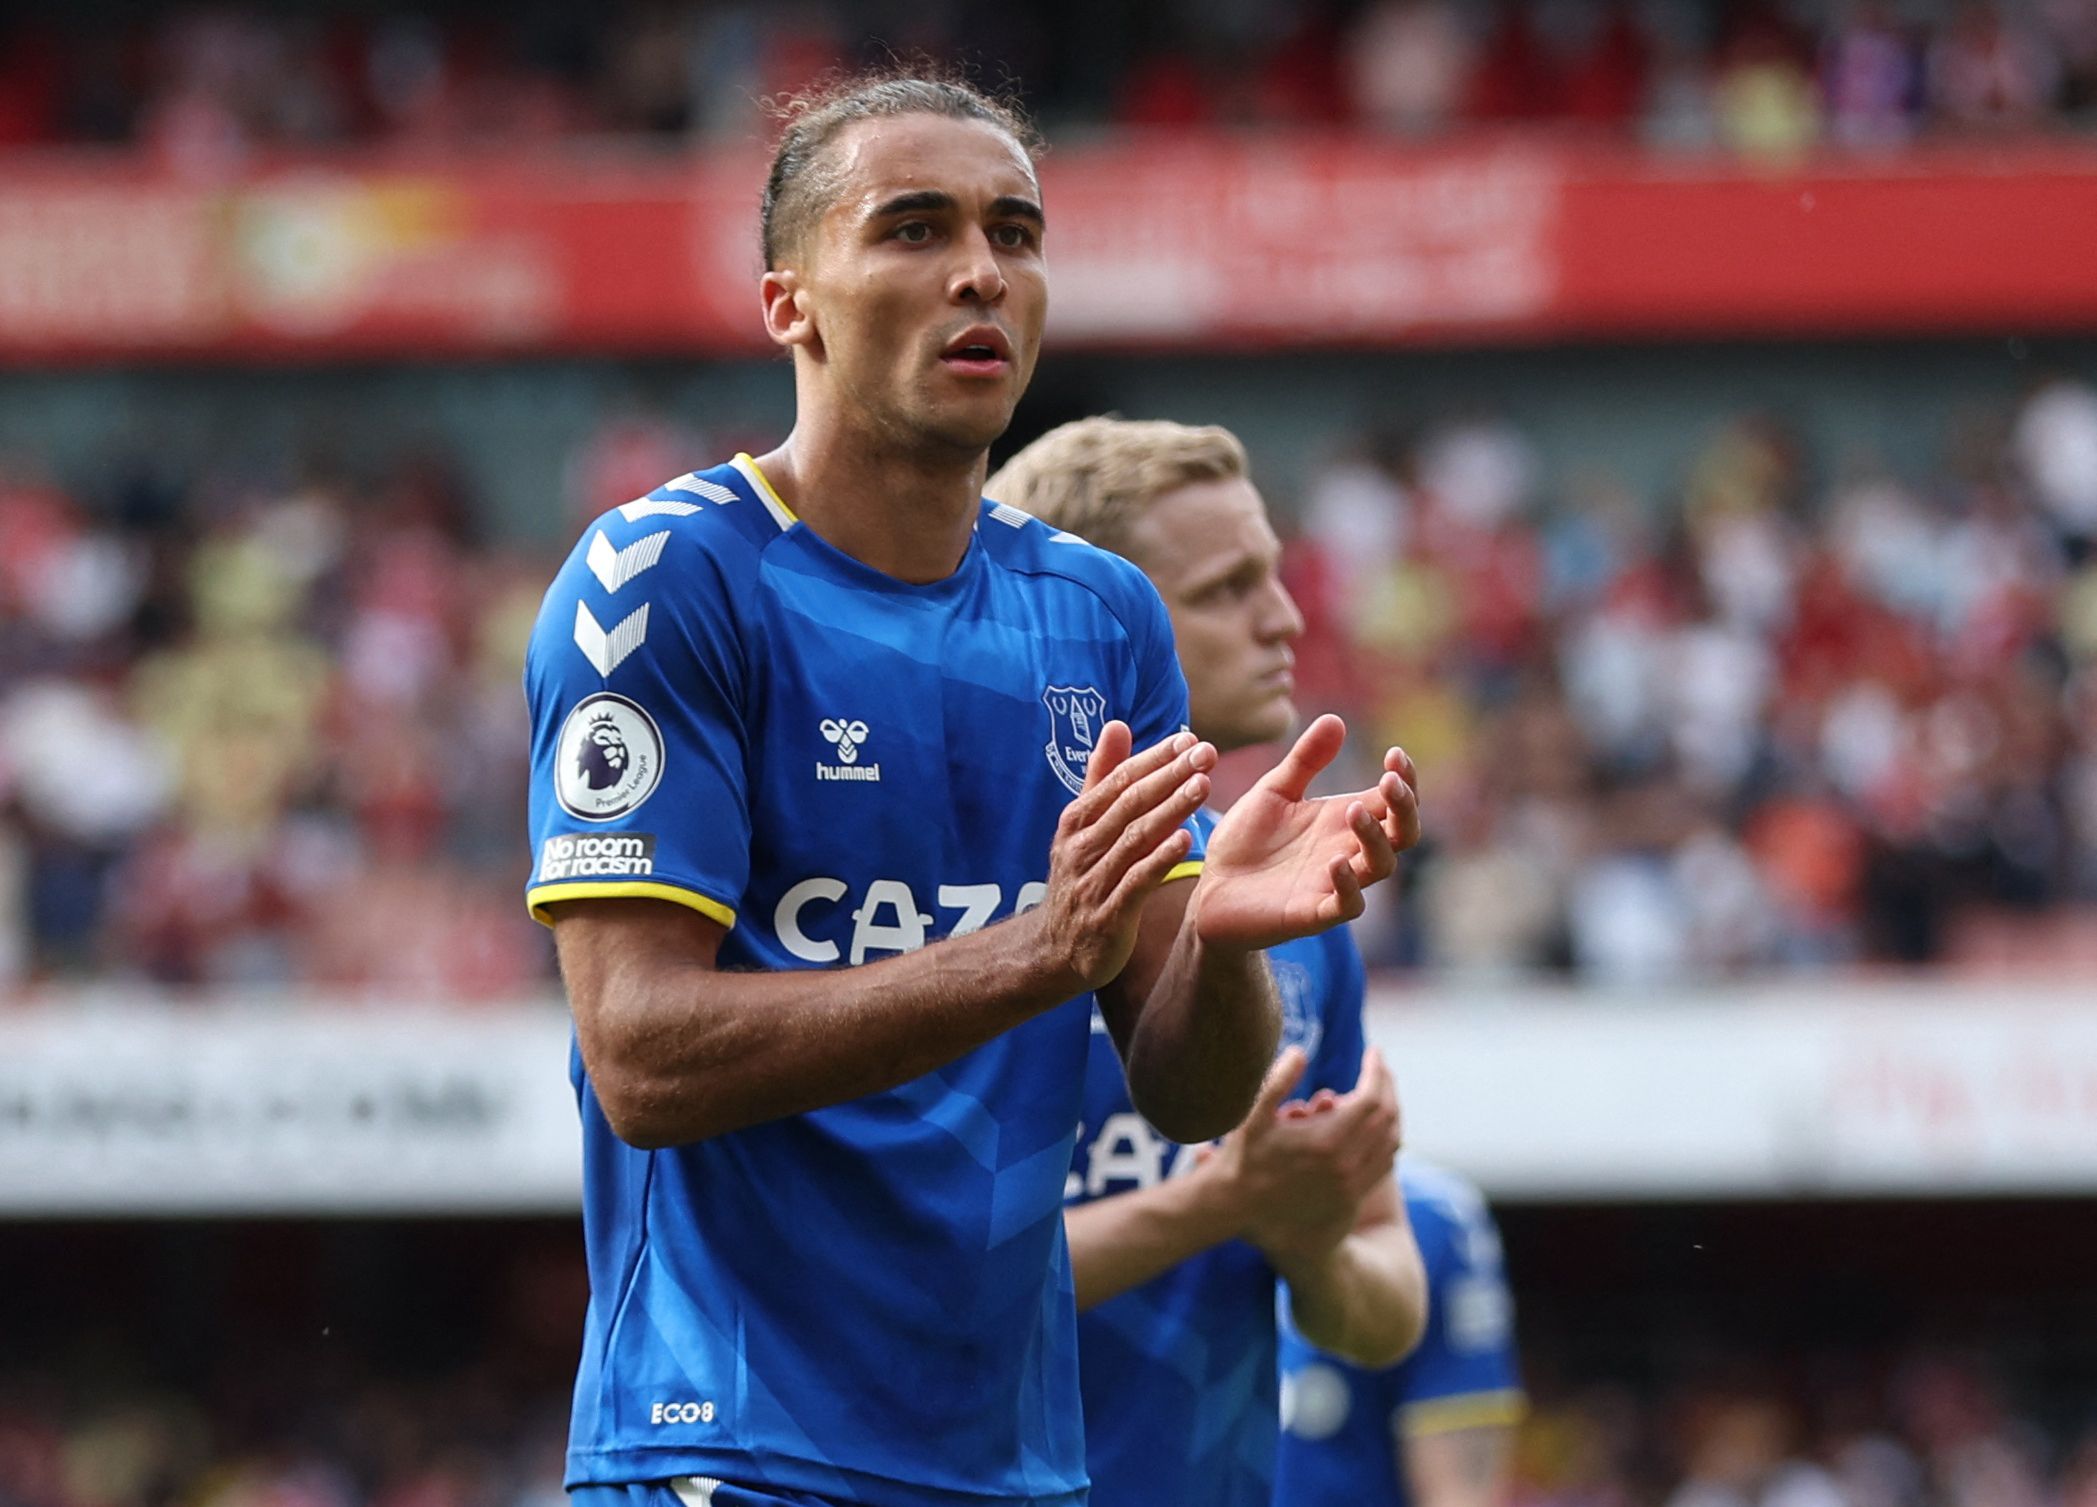 calvert-lewin-everton-premier-league-frank-lampard-telegraph-west-ham-united-transfer-news-david-moyes-latest-aaron-cresswellSoccer Football - Premier League - Arsenal v Everton - Emirates Stadium, London, Britain - May 22, 2022 Everton's Dominic Calvert-Lewin applauds fans after the match Action Images via Reuters/Matthew Childs EDITORIAL USE ONLY. No use with unauthorized audio, video, data, fixture lists, club/league logos or 'live' services. Online in-match use limited to 75 images, no video